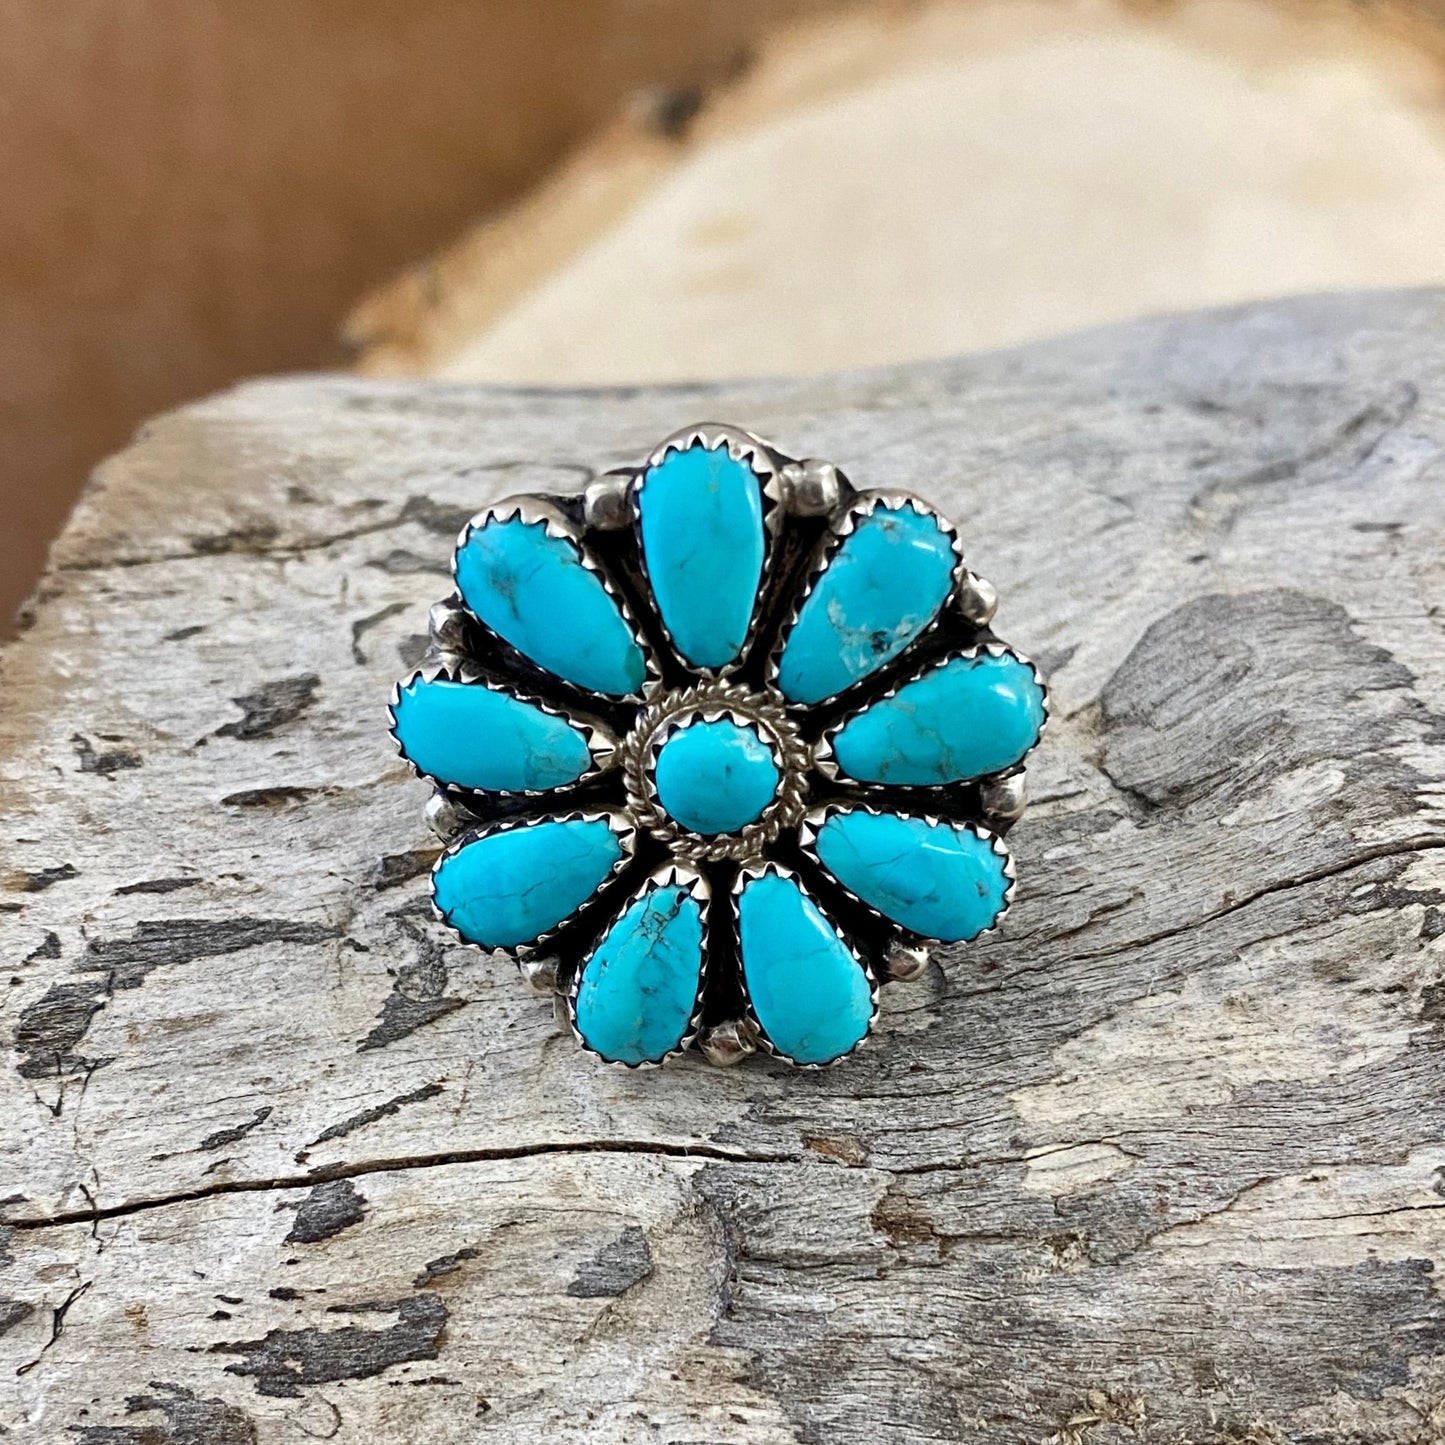 Turquoise Sterling Silver Cluster Ring Made By Native Artist Zeta BegayClusters were developed by Zuni artists in the 1920s and 30s. They started by arranging hand-cut gemstones into gorgeous designs that resembled snowflakes and flowers, among many other things. The designs were typically made with turquoise, coral and jet, but today's artists use all kinds of stones, from Spiny Oyster to Mother of Pearl. 